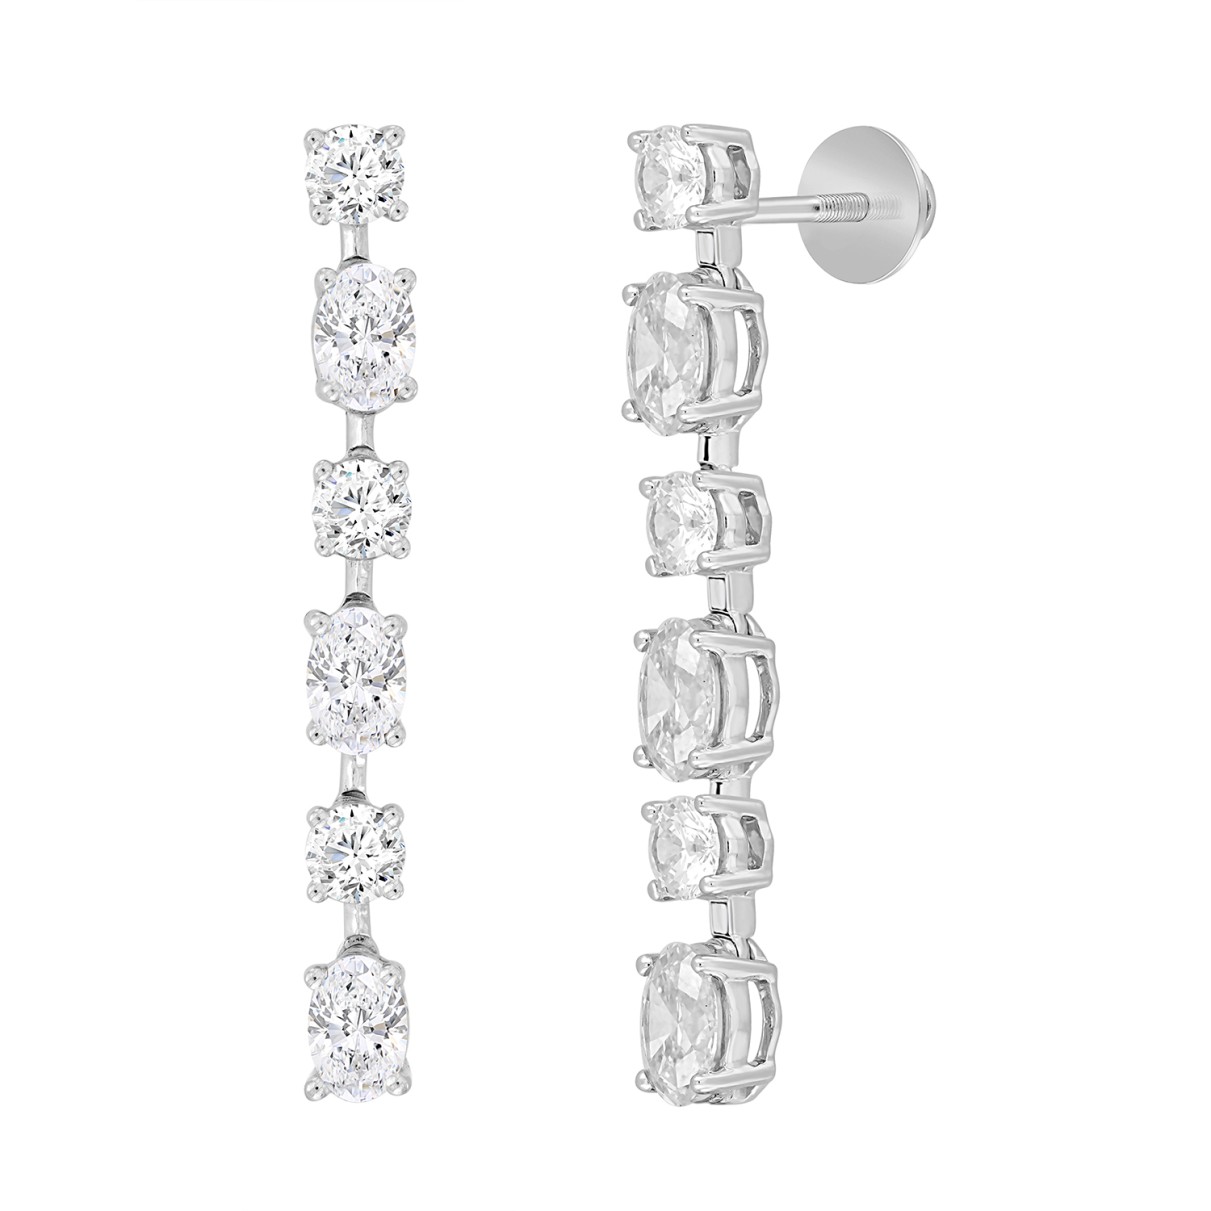 LADIES LINEAR EARRINGS 4 1/2CT OVAL/ROUND DIAMOND 14K WHITE GOLD